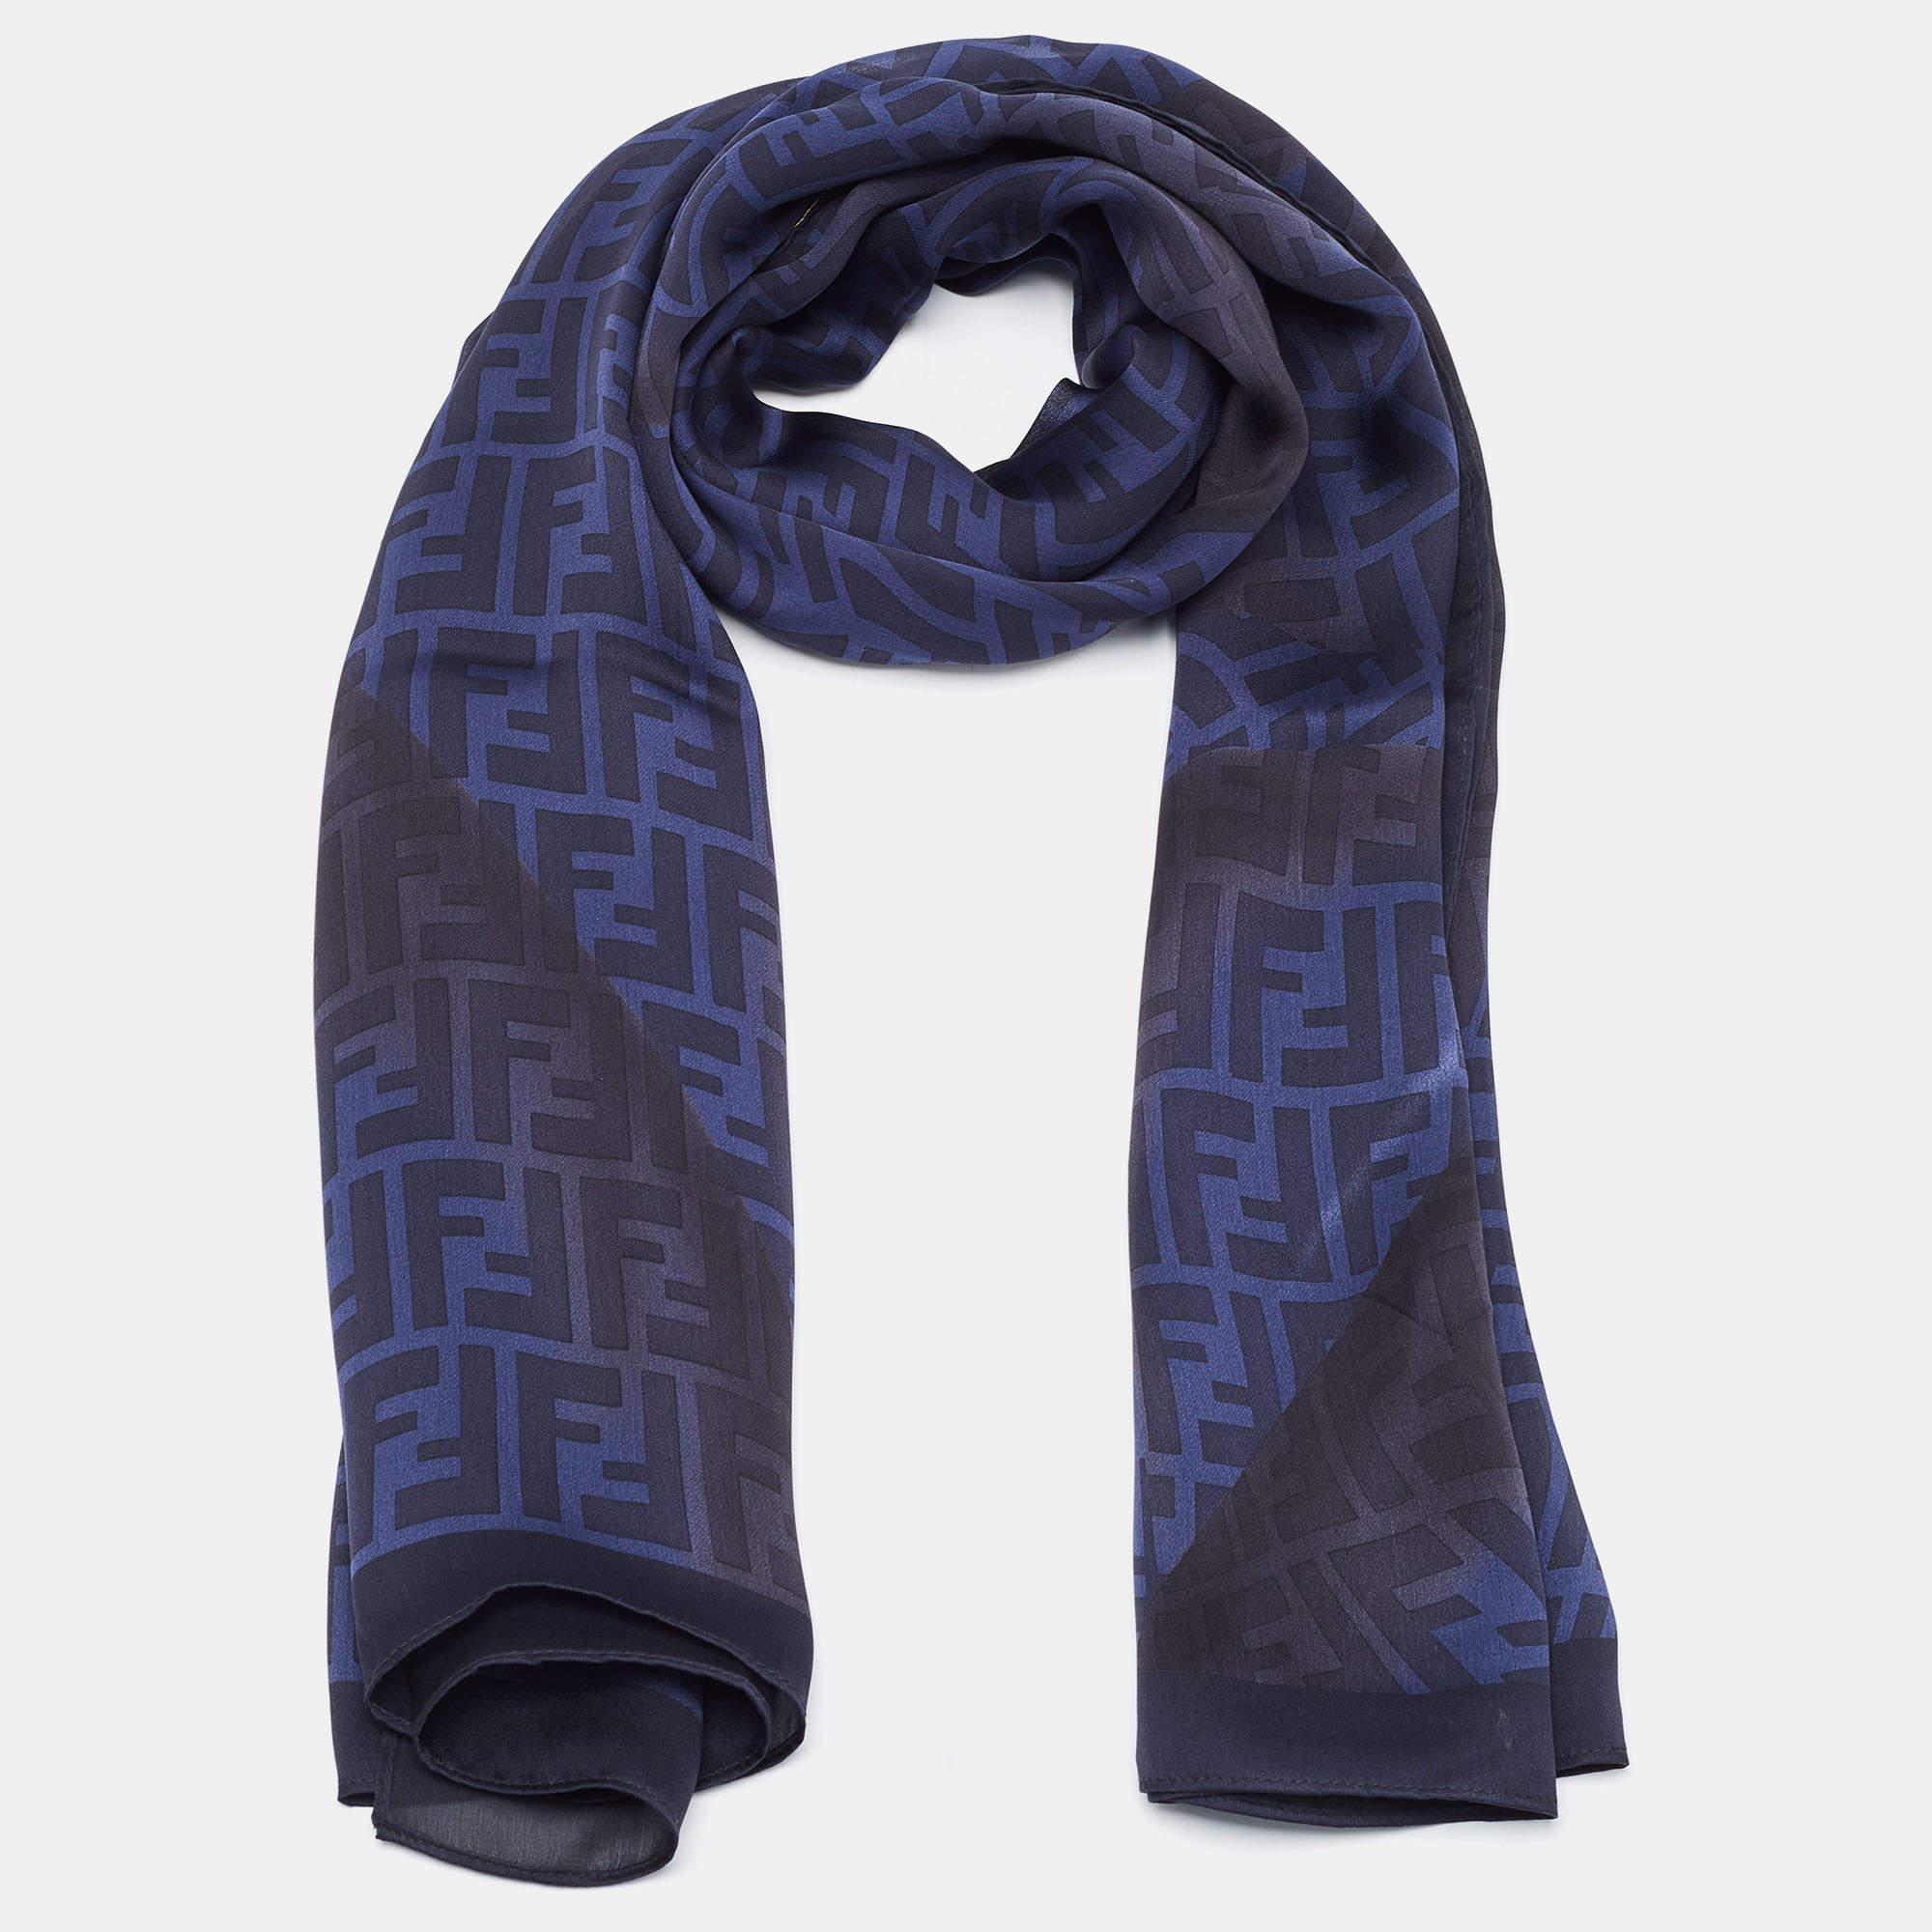 Whether it is over an evening outfit or chic casuals, Fendi ensures an extra element of style with this gorgeous scarf. Made of silk, the creation's appeal is brought out with Zucca prints all over.

